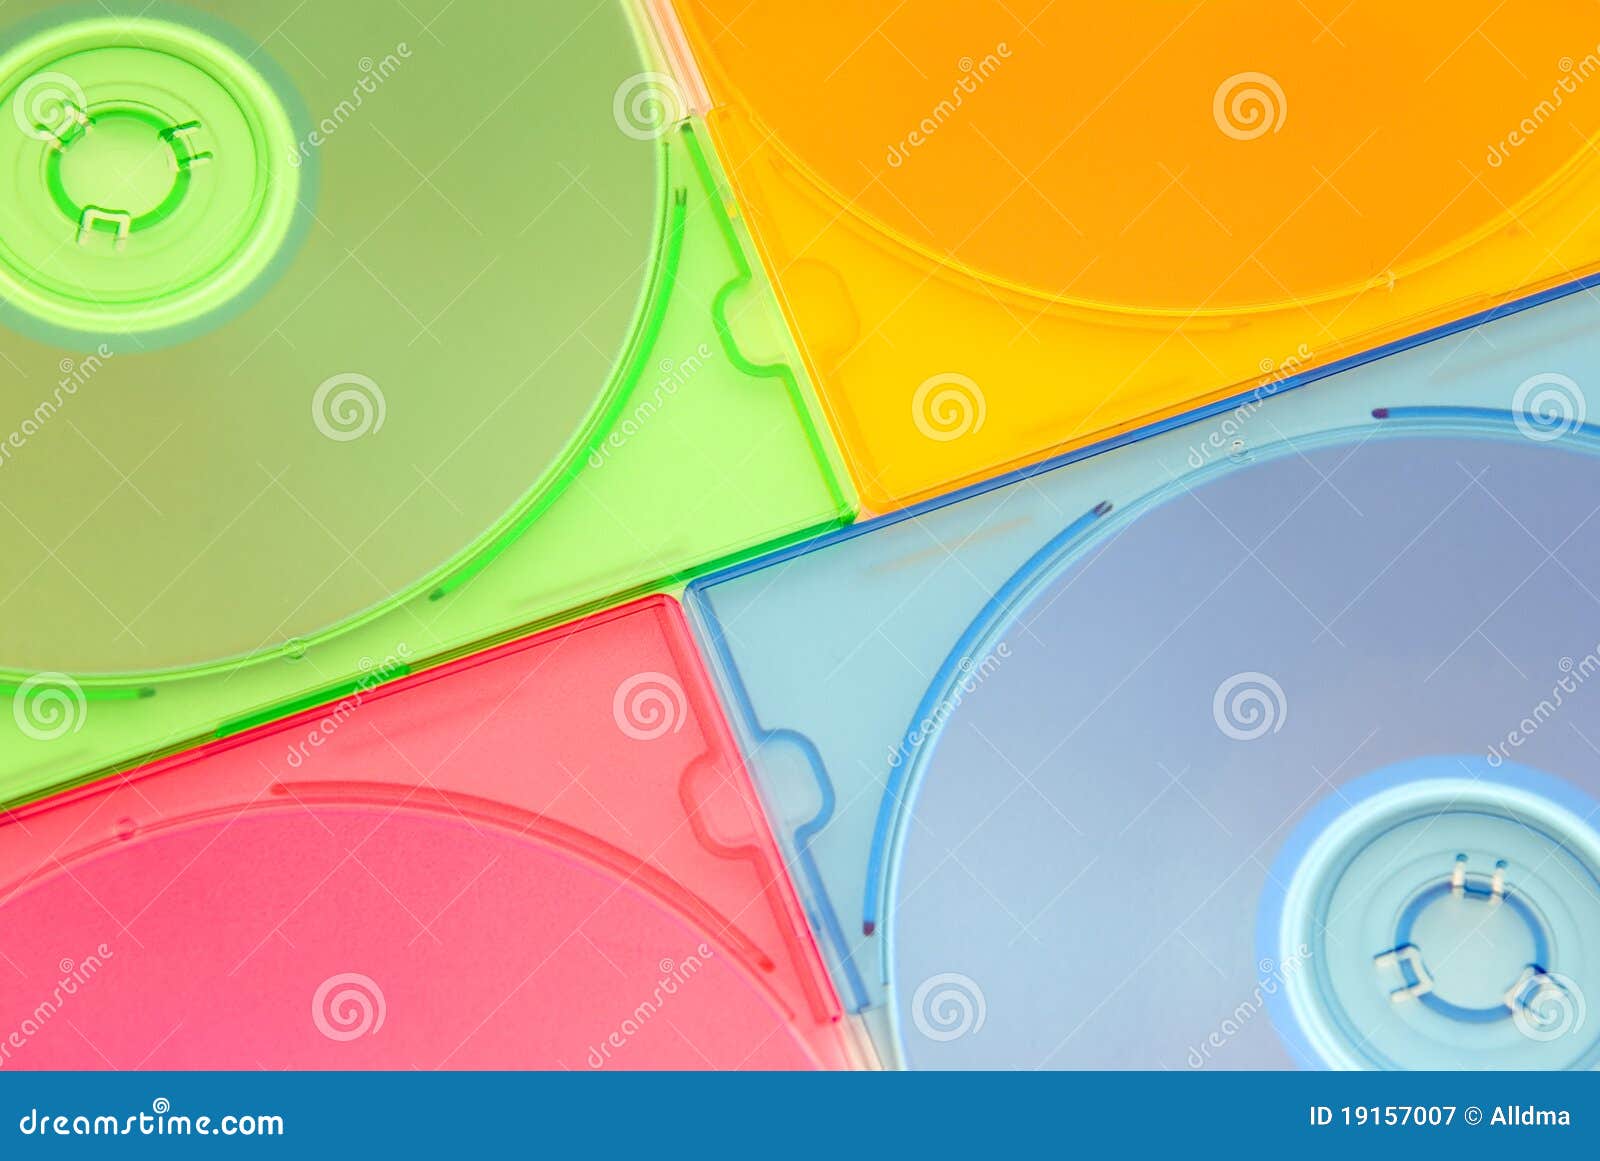 Box for Cd stock image. Image of color, green, multimedia - 19157007